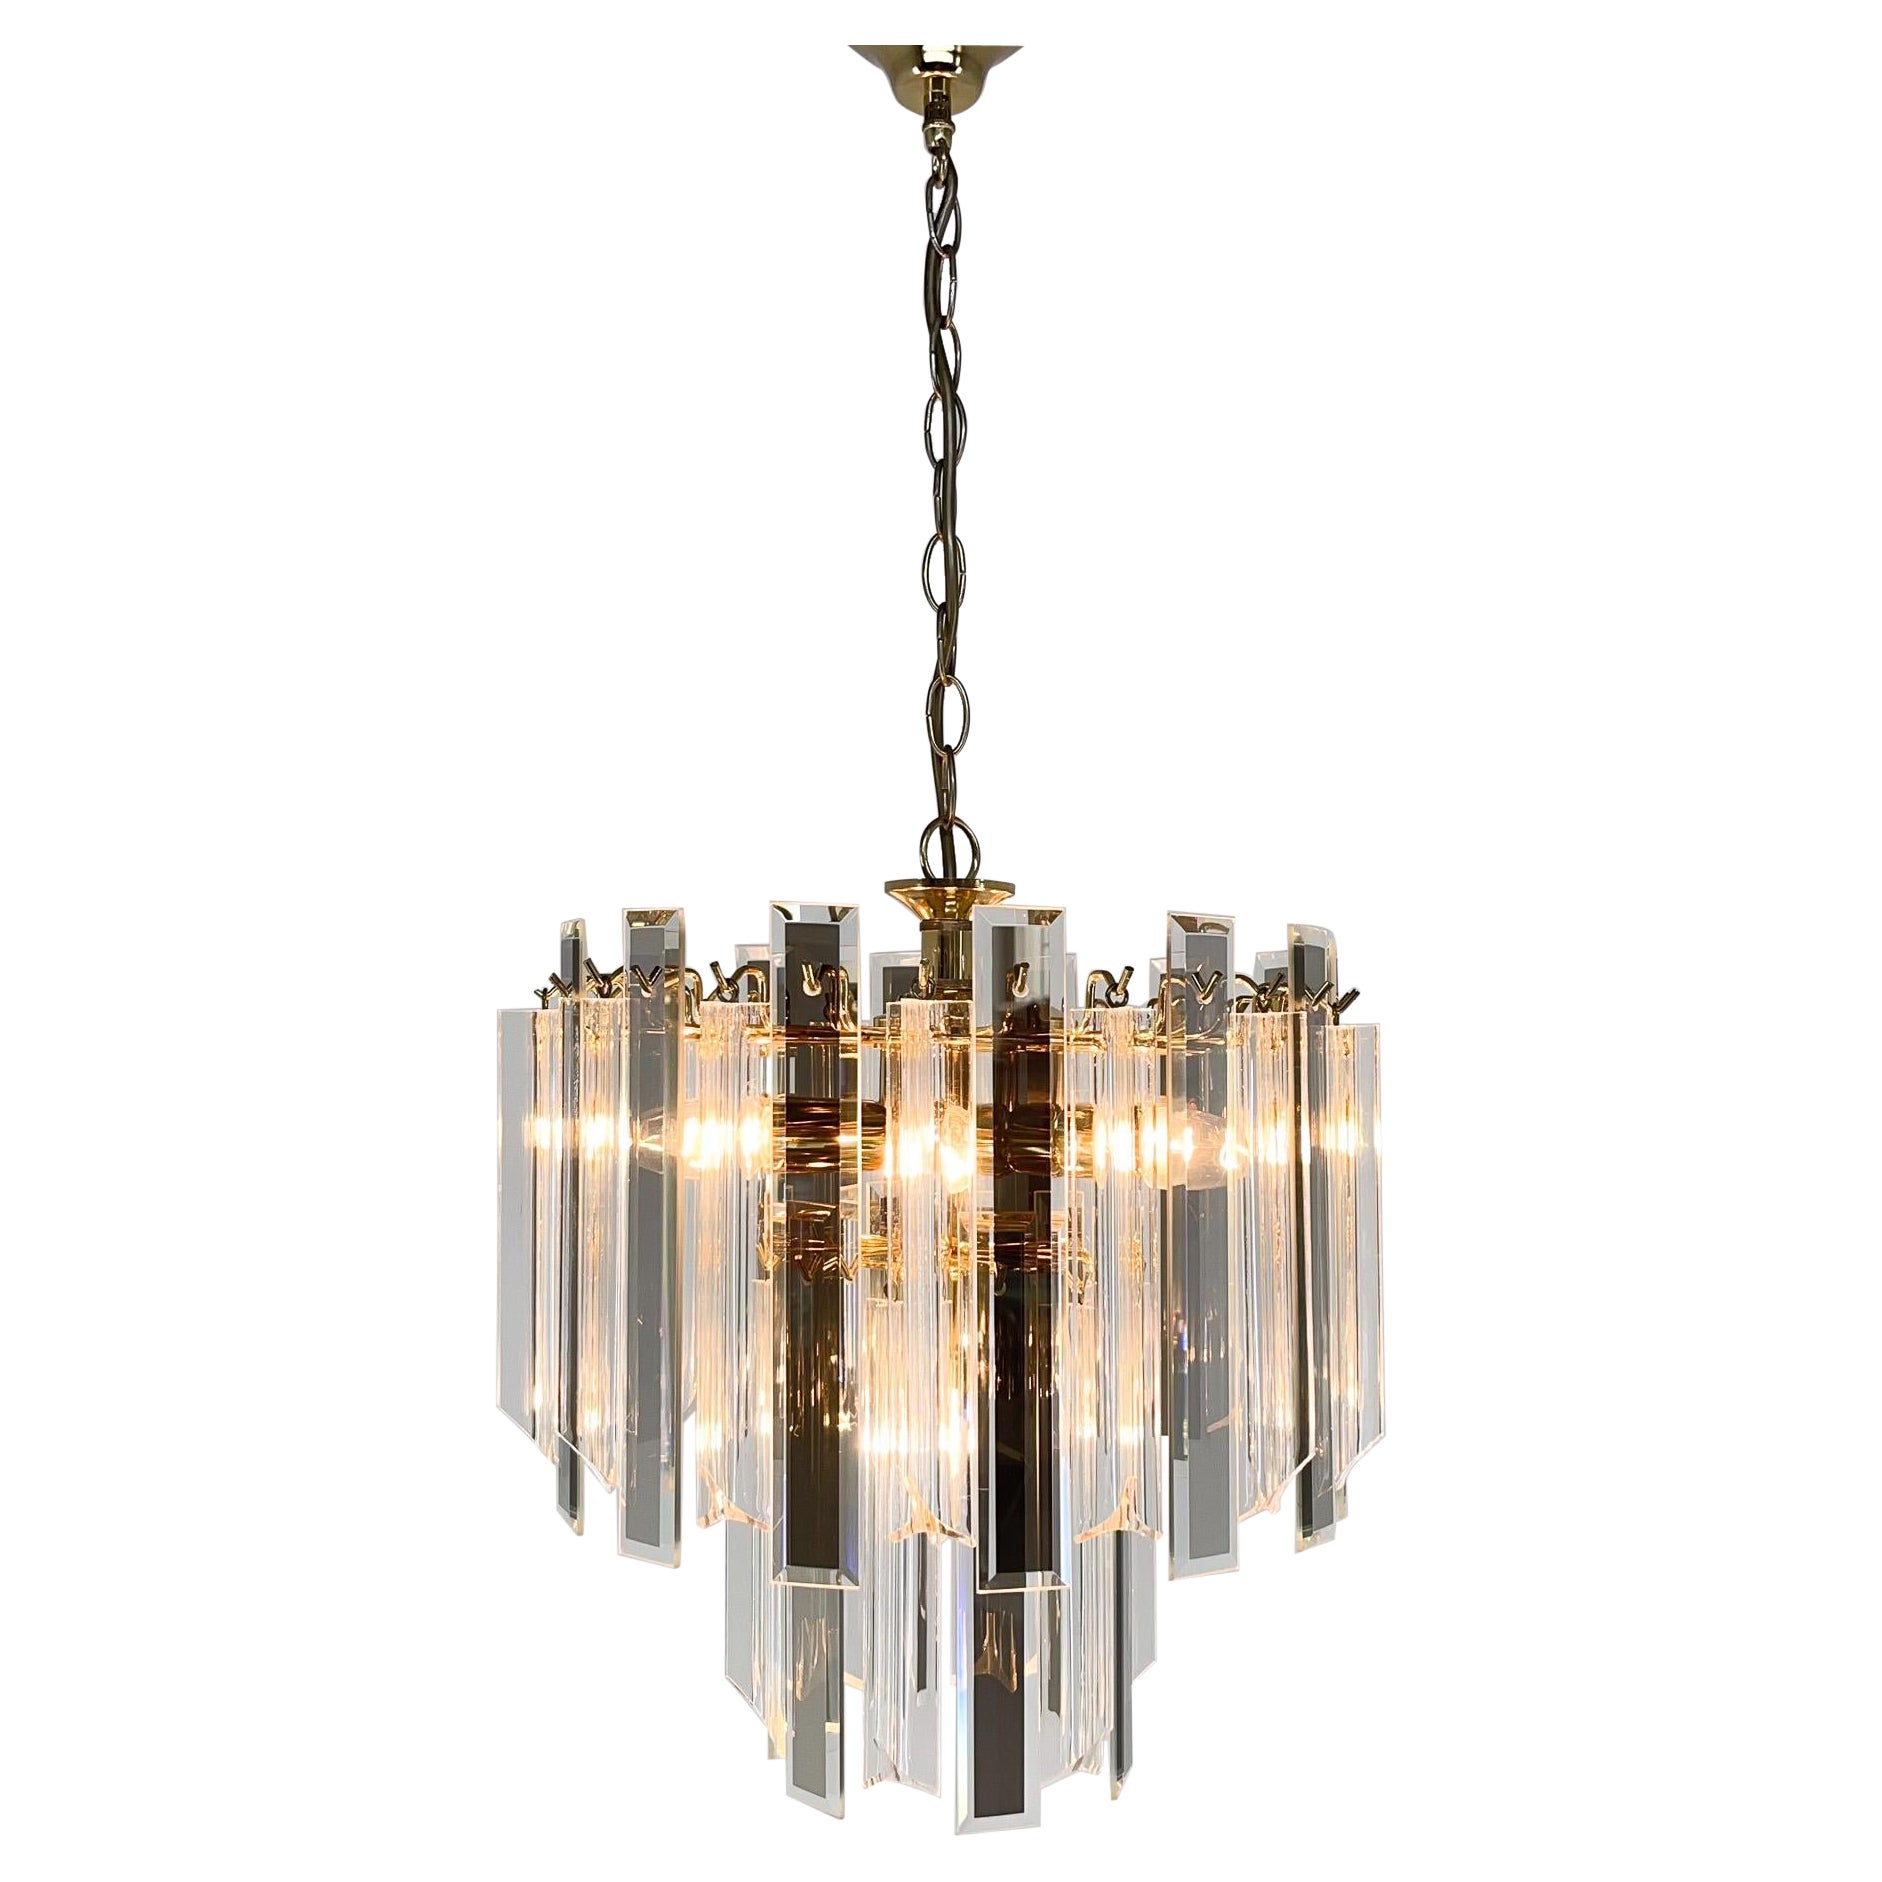 Midcentury Brass, Glass and Lucite Chandelier, Austria 1970s For Sale